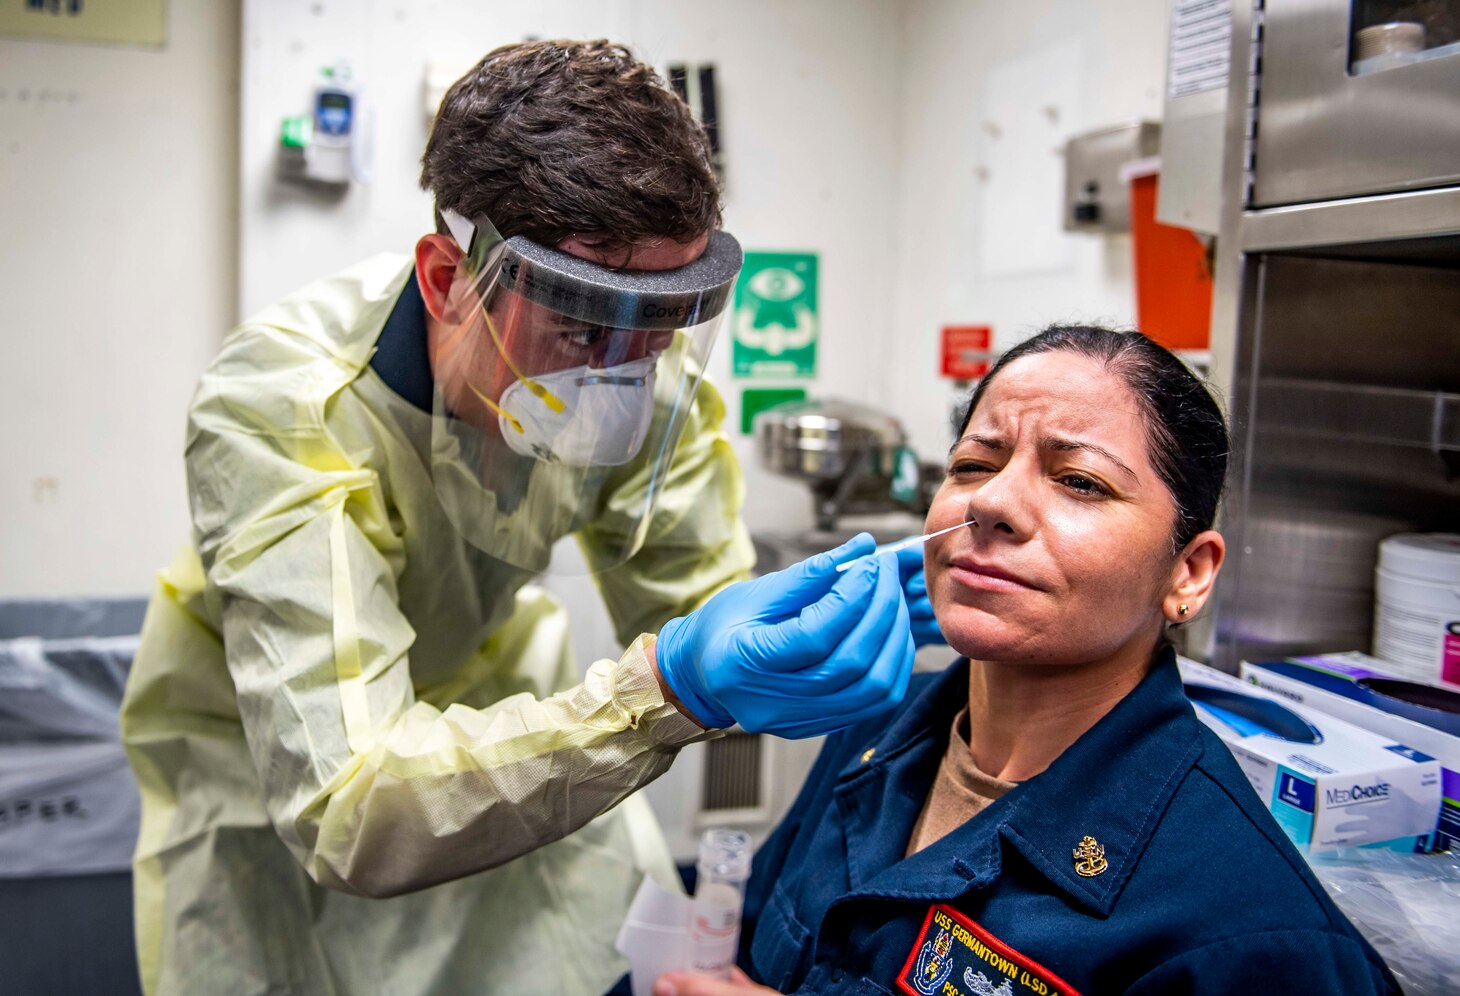 PHILIPPINE SEA (July 12, 2020) Hospital Corpsman 3rd Class Zakary Peterson, from Van, Texas, left, uses a nasal swab to conduct a COVID-19 test of Chief Personnel Specialist Melissa Colon, from Fajardo, Puerto Rico, aboard the Whidbey Island-class dock landing ship USS Germantown (LSD 42) during a complete crew screening for the virus. Germantown, part of America Expeditionary Strike Group, is operating in the 7th Fleet area of operations to enhance interoperability with allies and partners and serve as a ready response force to defend peace and stability in the Indo-Pacific region. (U.S. Navy photo by Mass Communication Specialist 2nd Class Taylor DiMartino)